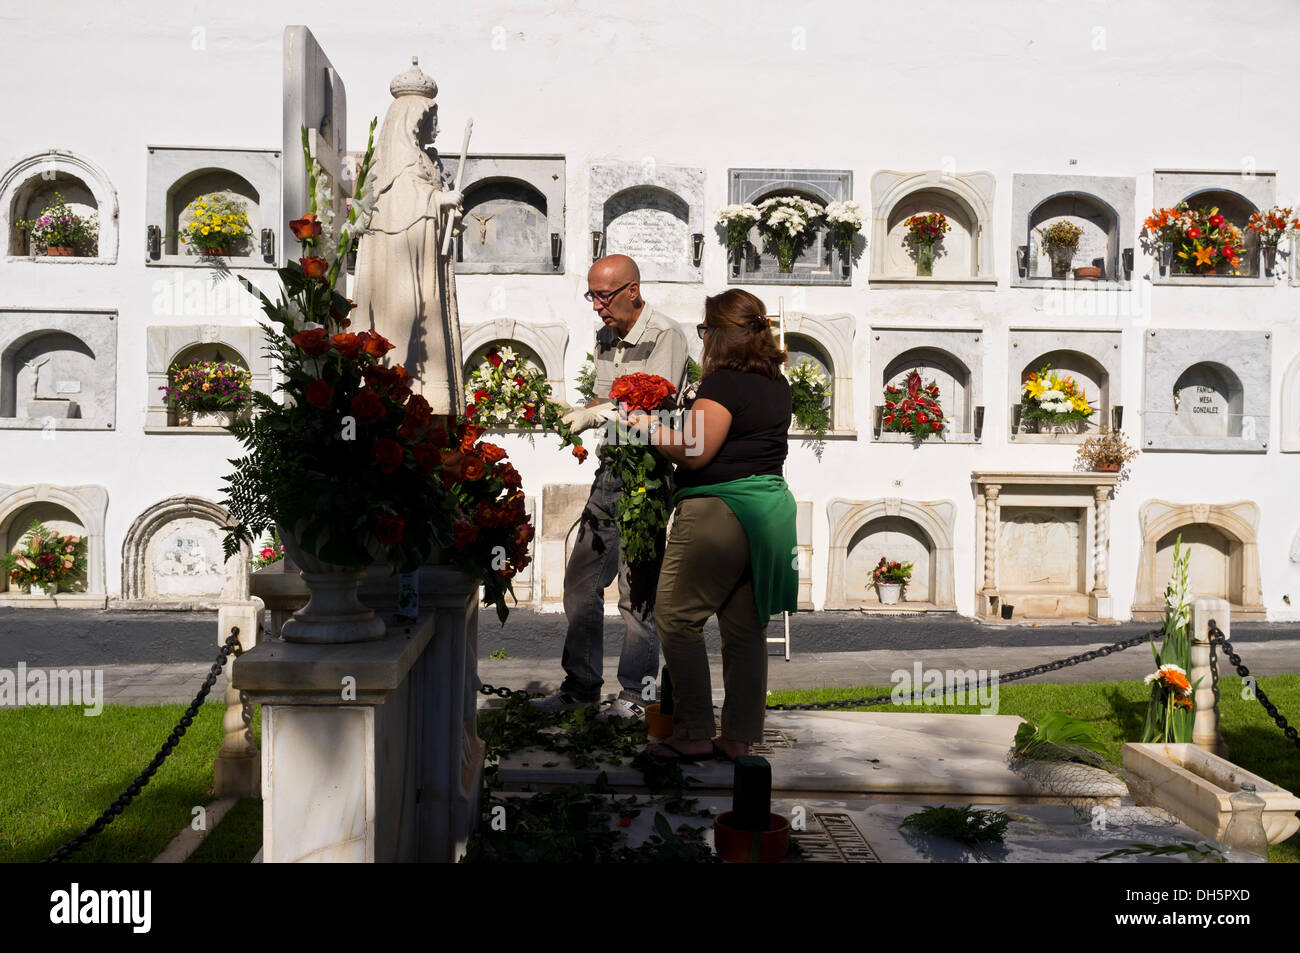 Tenerife, Canary Islands, Spain. 01st Nov, 2013. Day of the dead, Dia de los muertos, All souls day. Relatives visit the graves of their deceased family members and decorate them with flowers in remembrance. Municipal cemetery of Guia de Isora, Tenerife, Canary Islands, Spain. Credit:  Phil Crean A/Alamy Live News Stock Photo